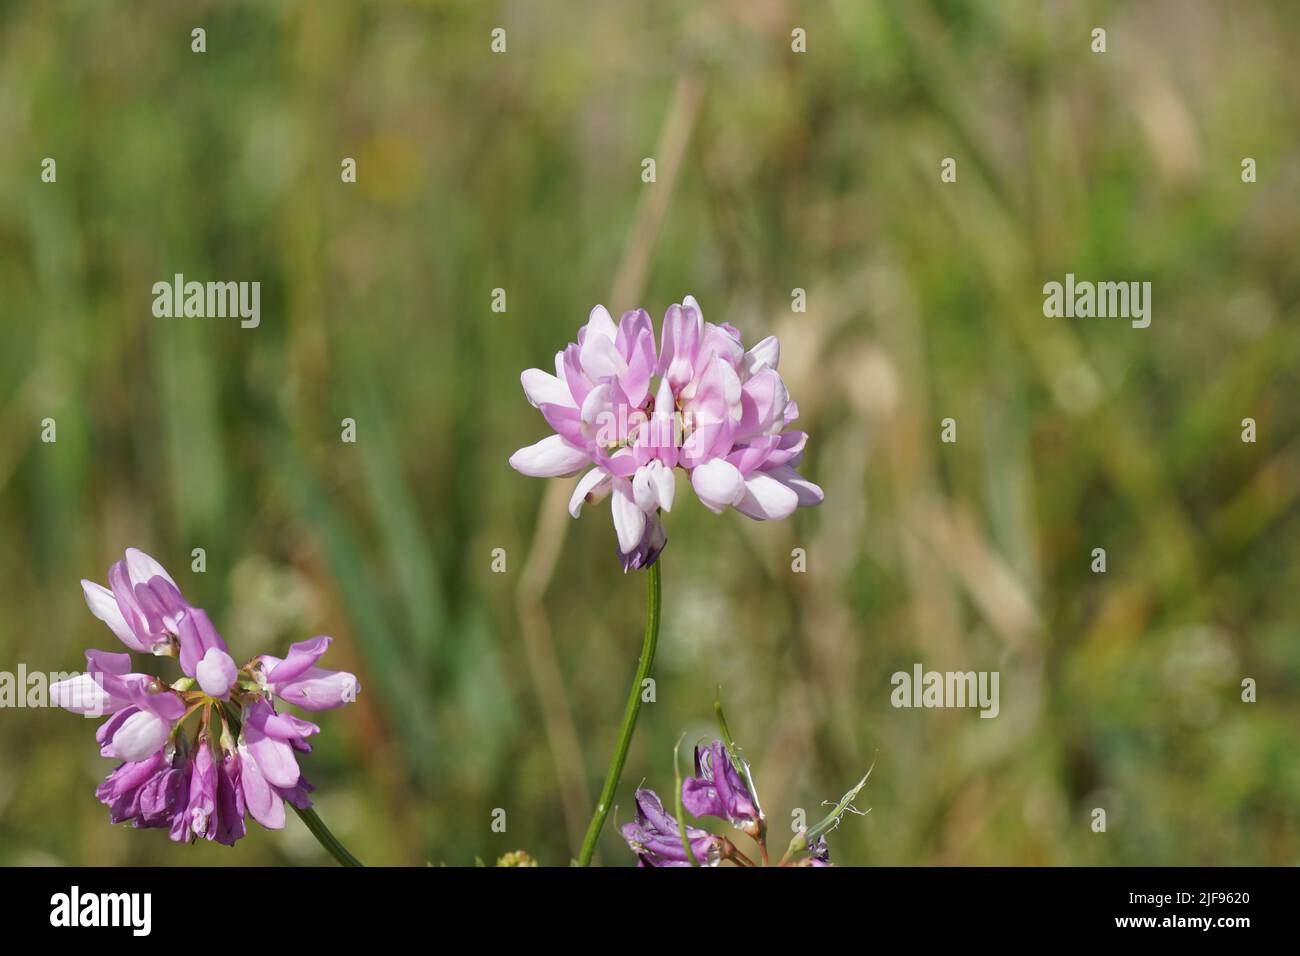 Closeup flower of Securigera varia (synonym Coronilla varia) known as crownvetch or purple crown vetch, family Fabaceae, Leguminosae. Blurred grass Stock Photo